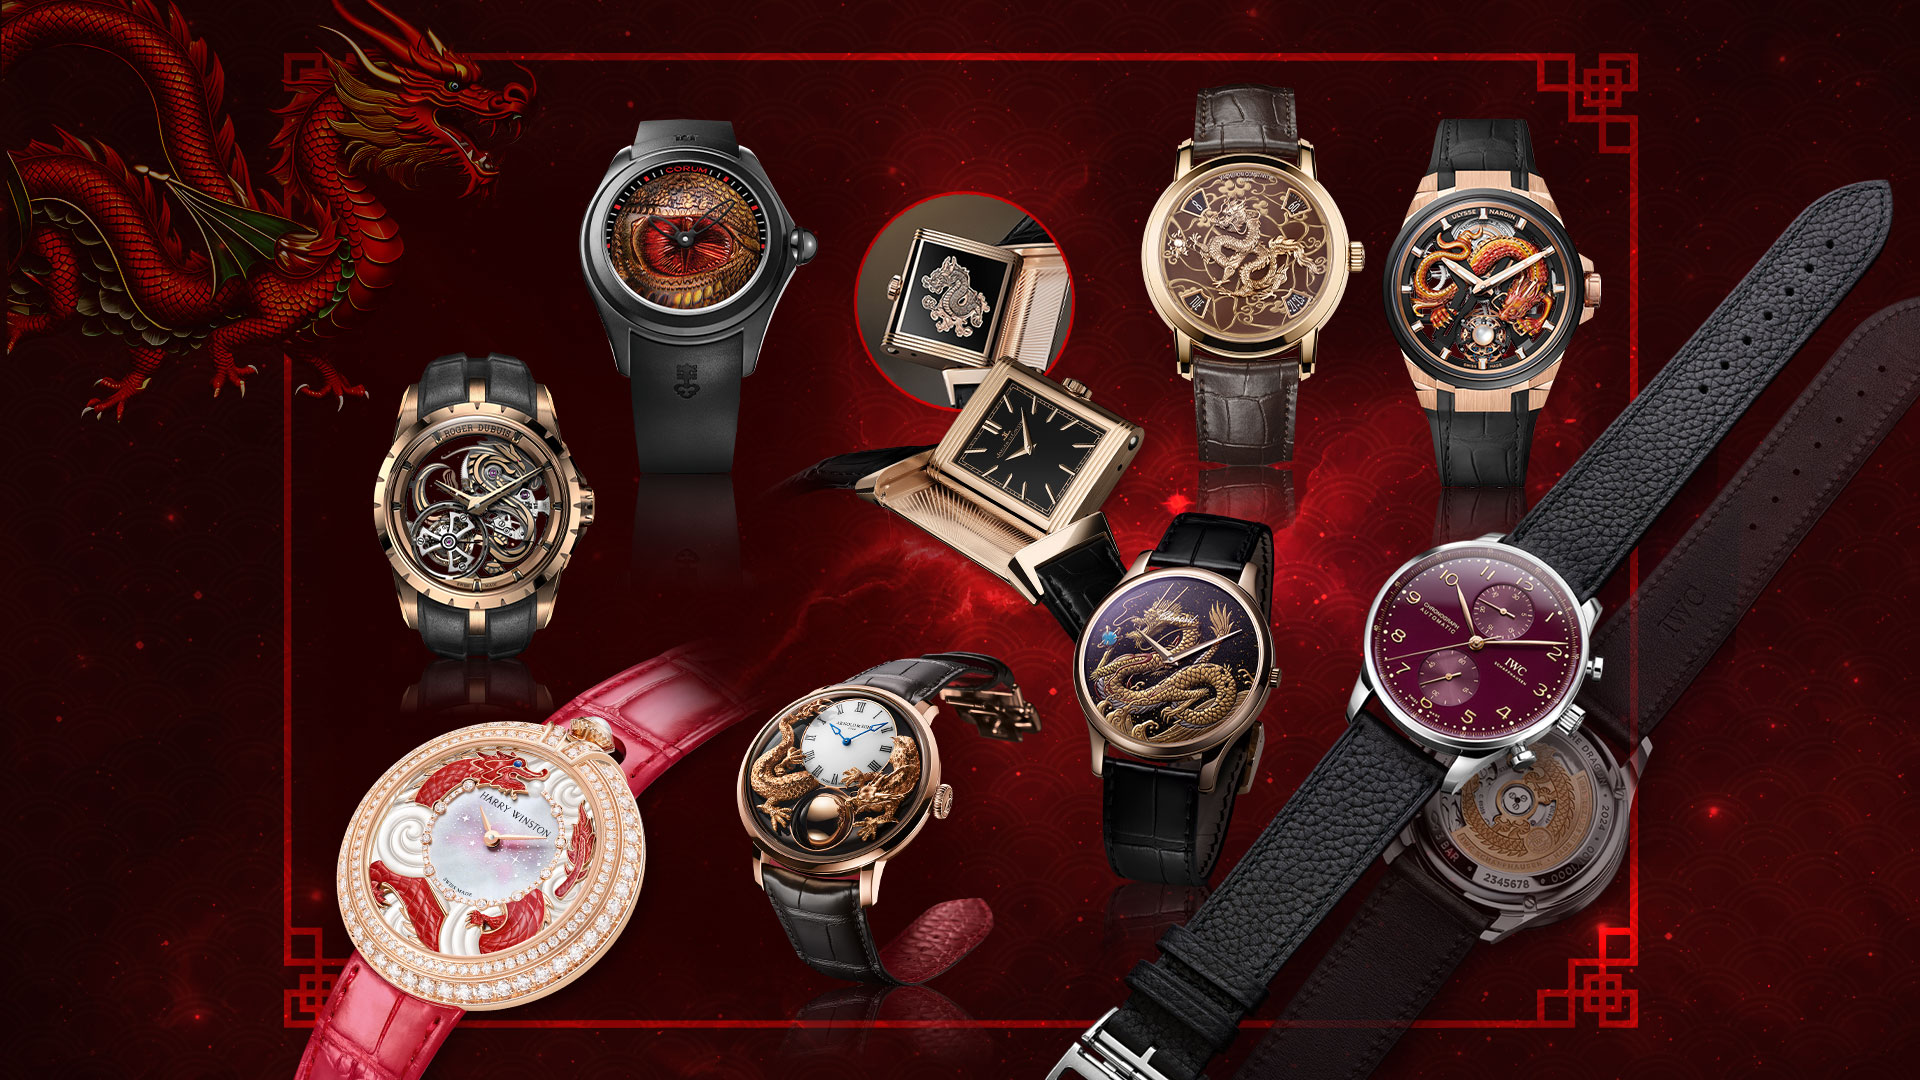 Dragon Layers: The fantastic beasts of the Chinese zodiac breathe new life into watch design